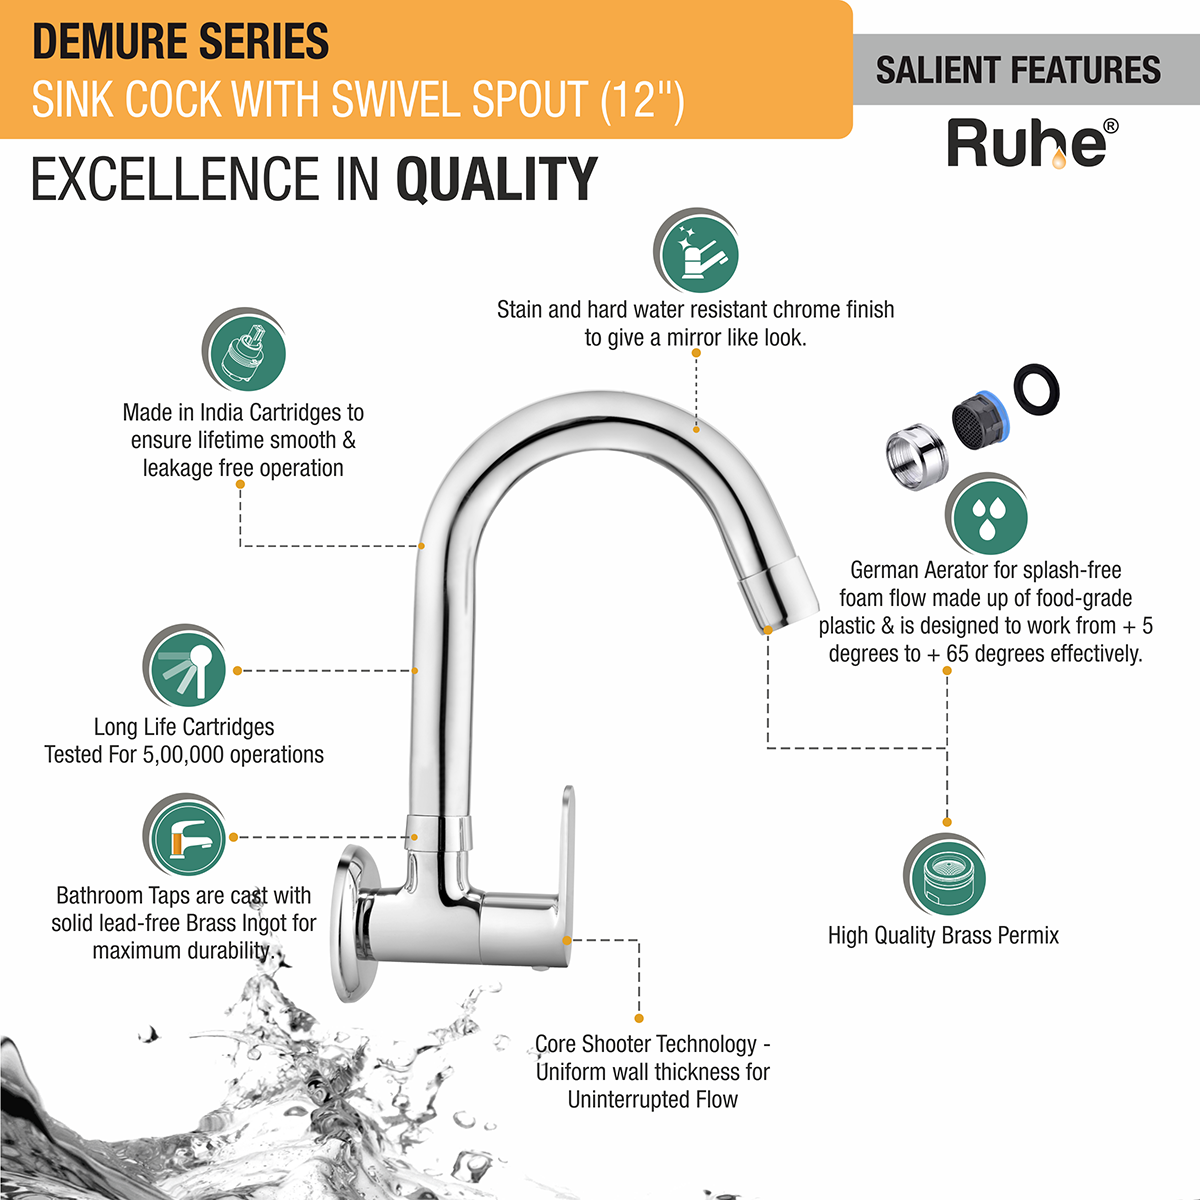 Demure Brass Kitchen Sink Tap with Small (12 inches) Round Swivel Spout - by Ruhe®